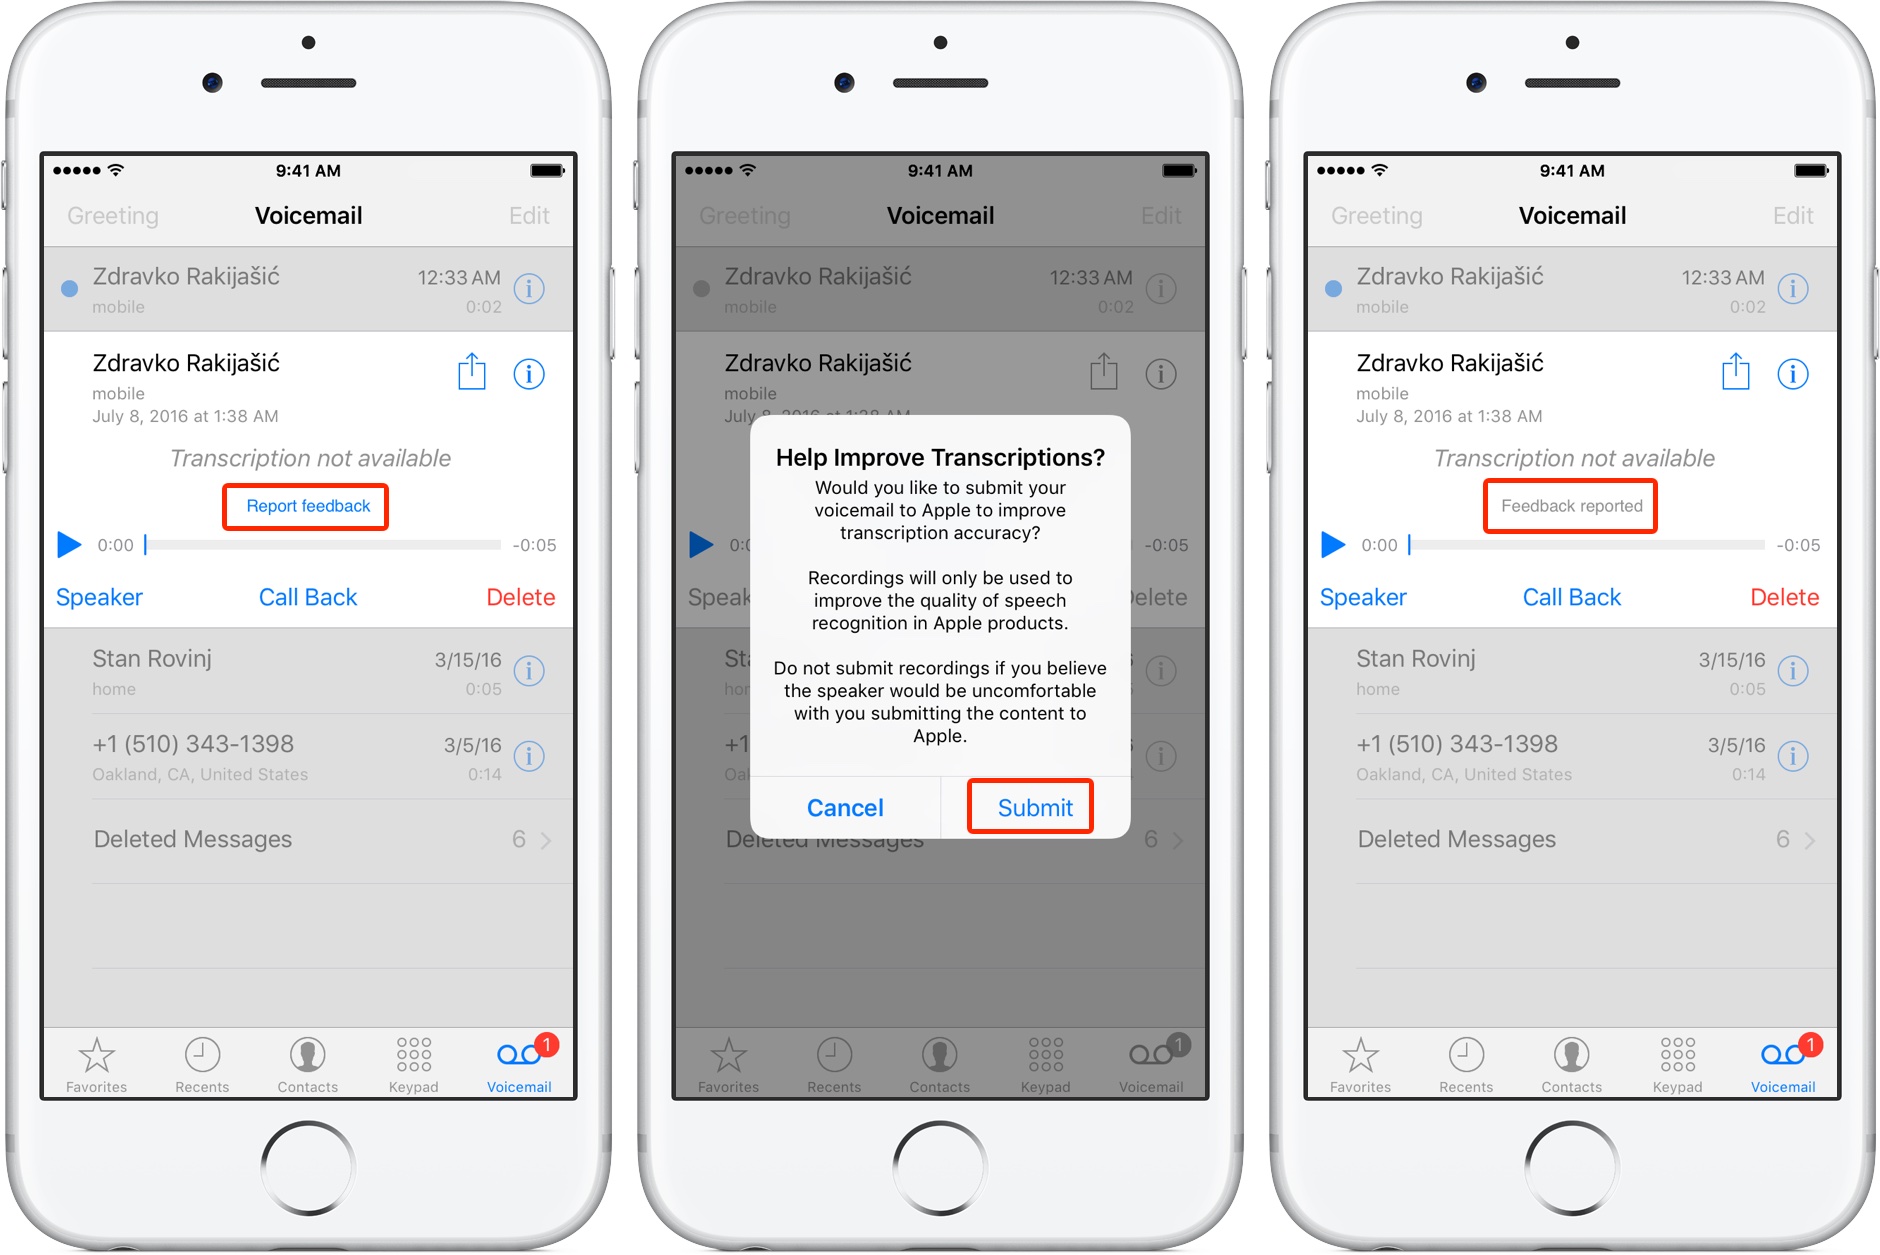 send voicemail feedback to apple